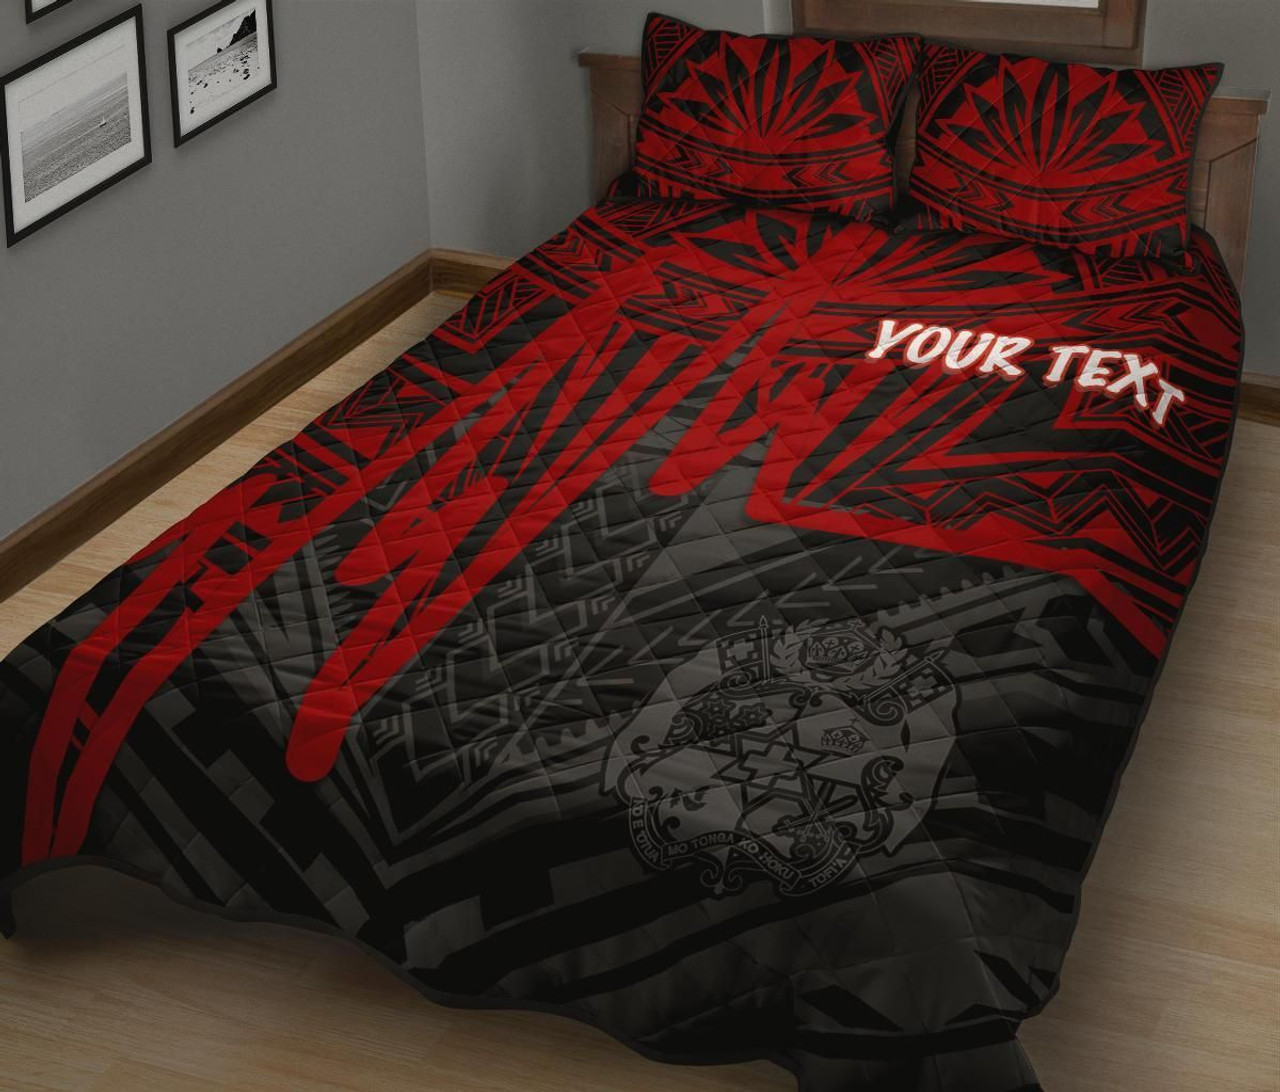 Tonga Personalised Quilt Bed Set - Tonga Seal In Heartbeat Patterns Style (Red) 3